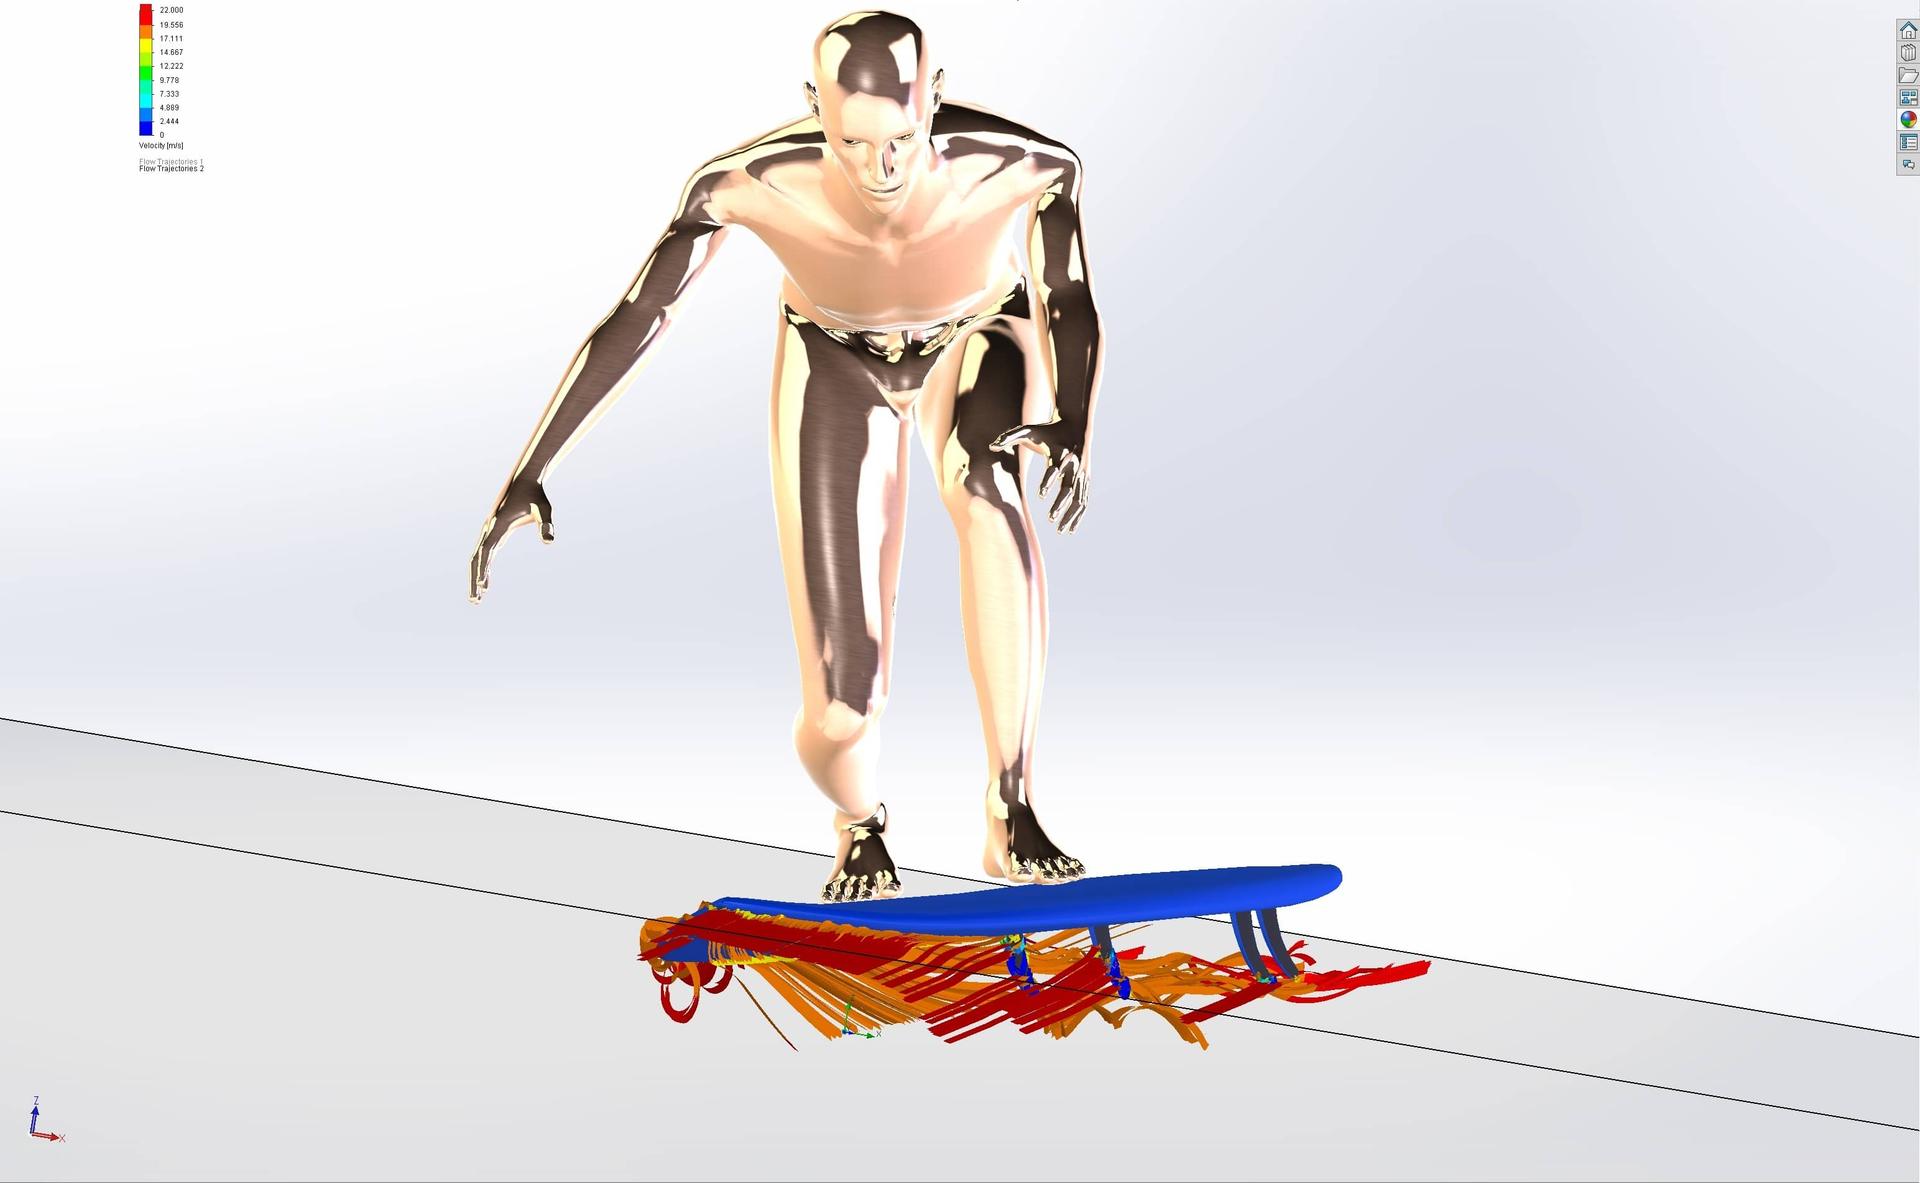 The 3D Avatar of Ian Walsh on a surf board - image by Falcon Pursuit